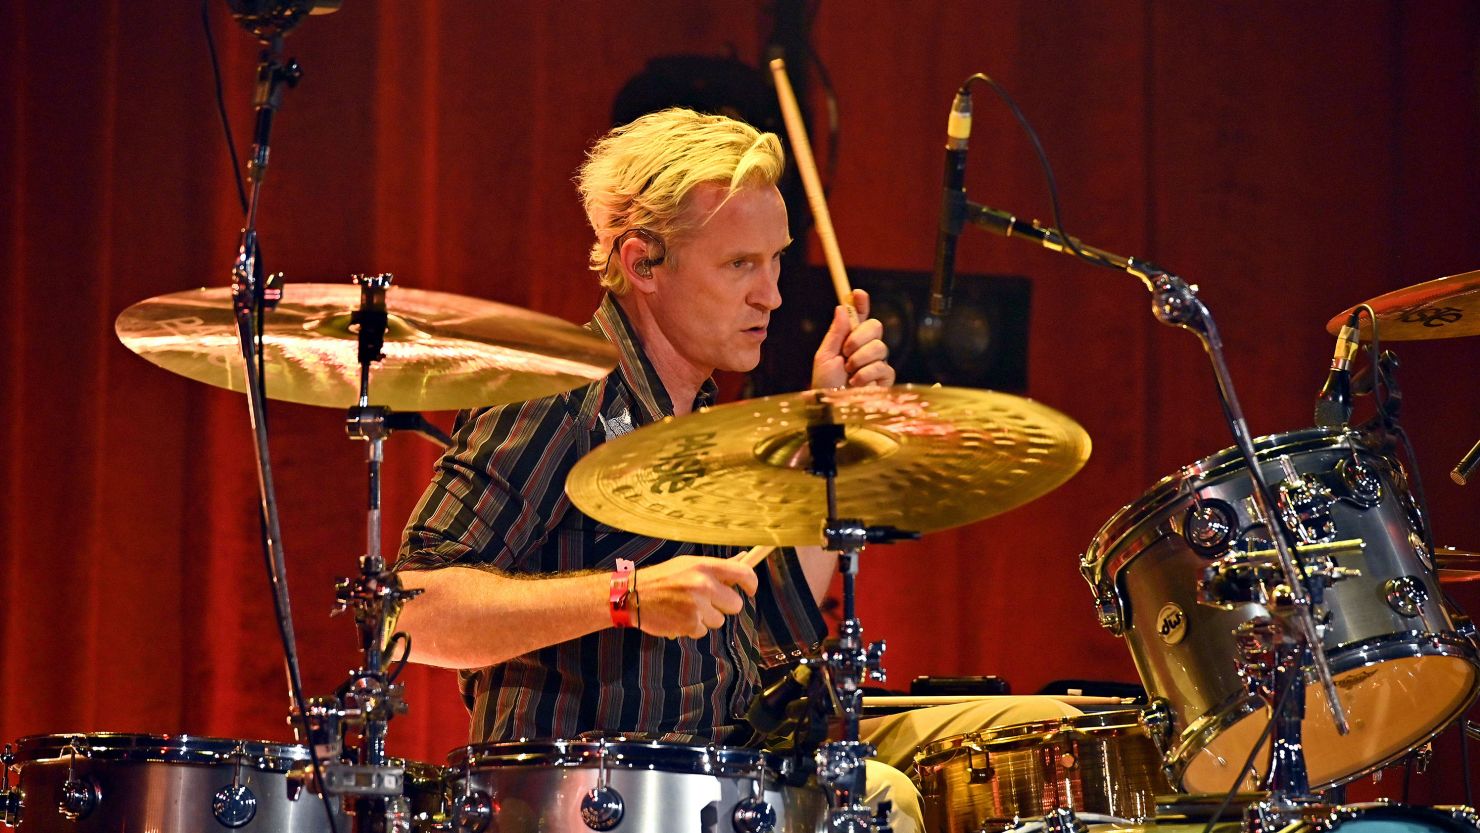 Josh Freese performs with The Offspring at the iHeartRadio theater in Burbank, California, in August.